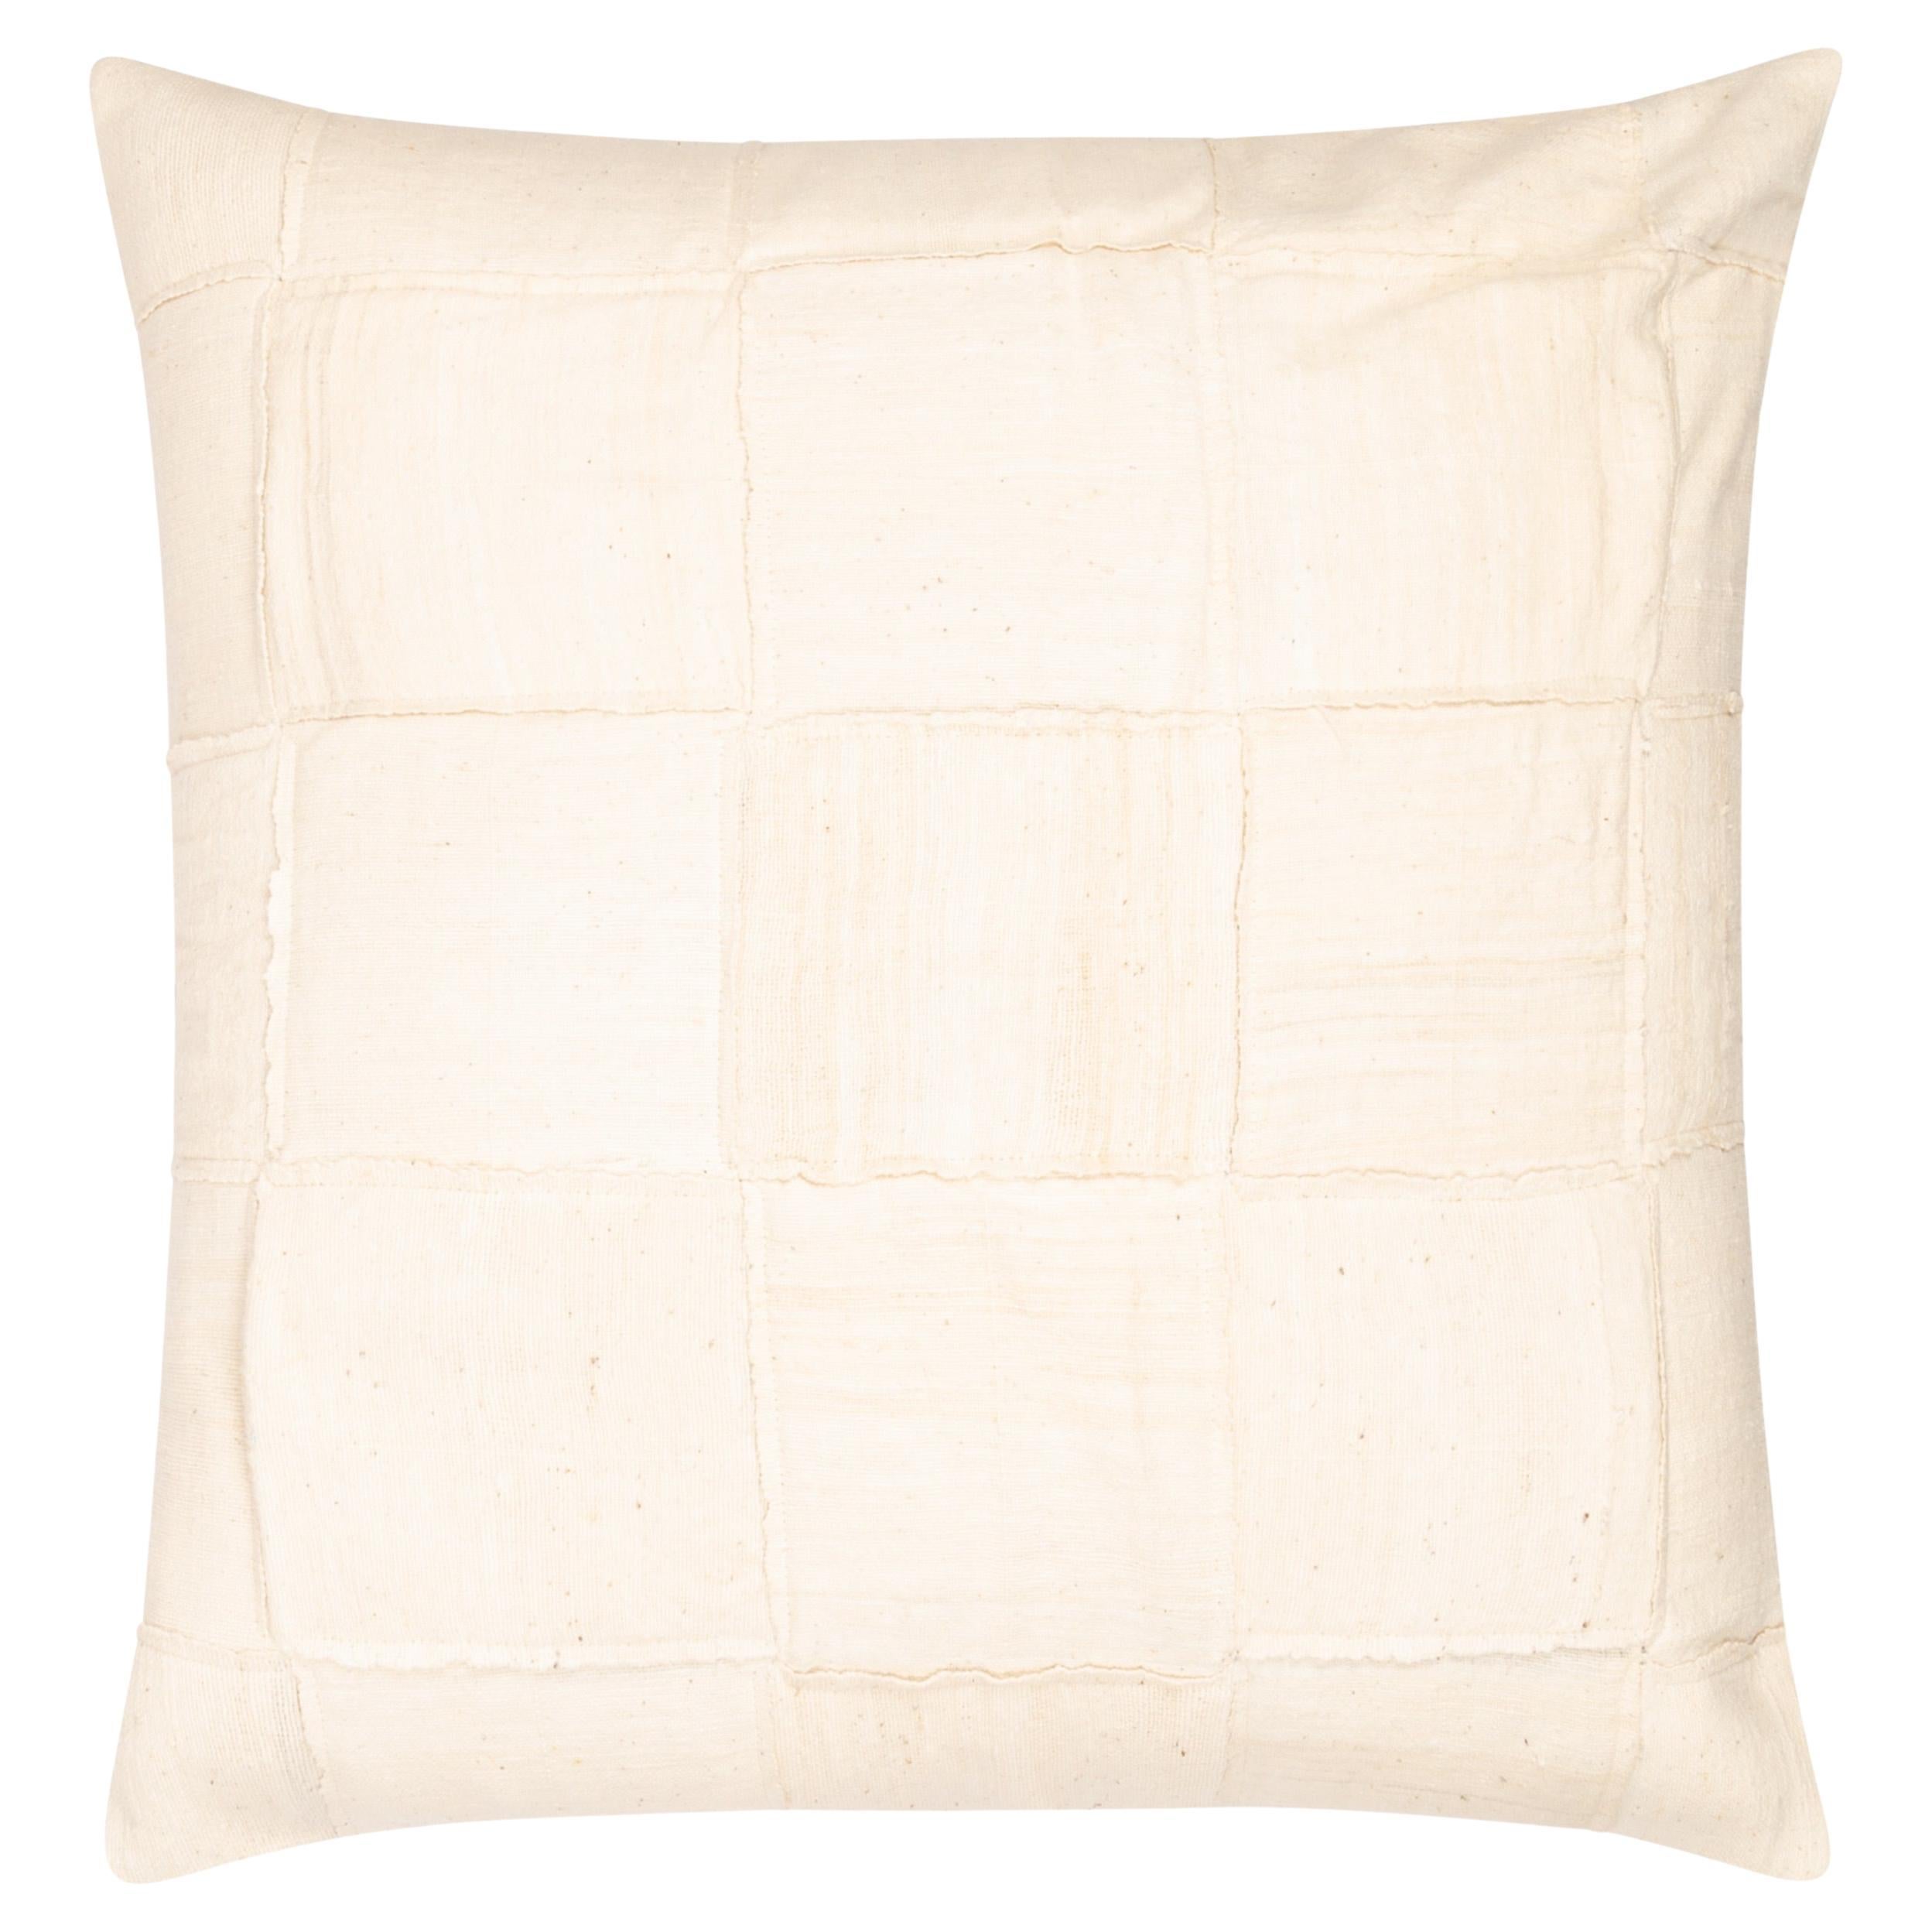 Big Contemporary White Handwoven Cushion Cover For Sale